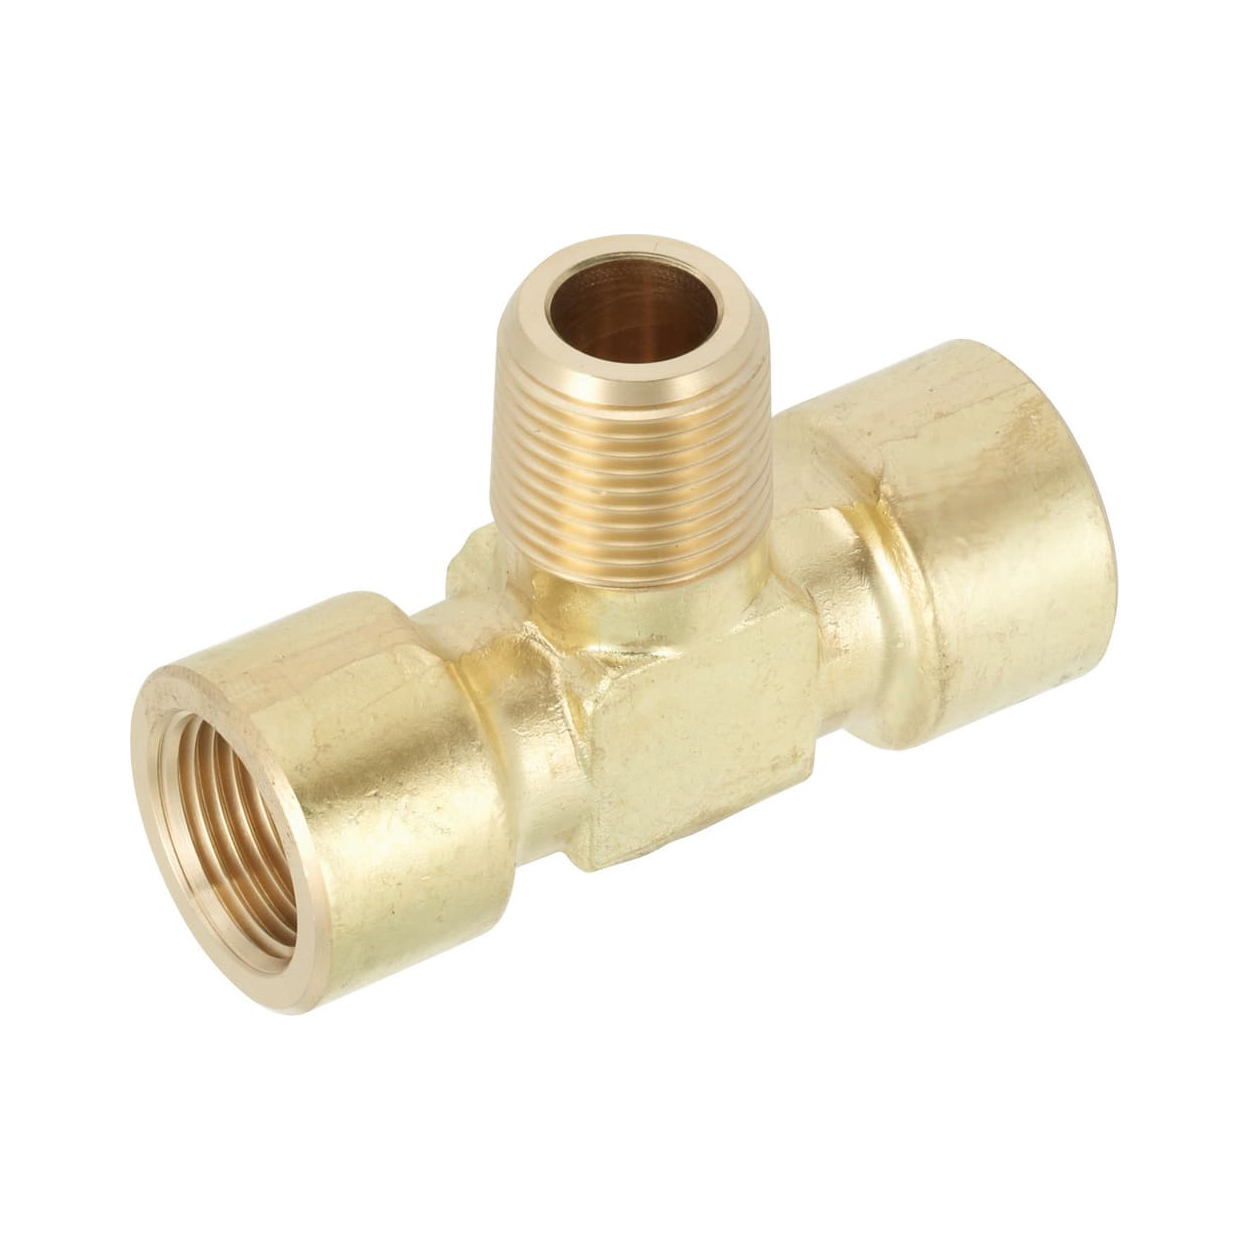 Brass Fittings for Steel Pipe / Tee / Threaded / Tapped SJSXT15A